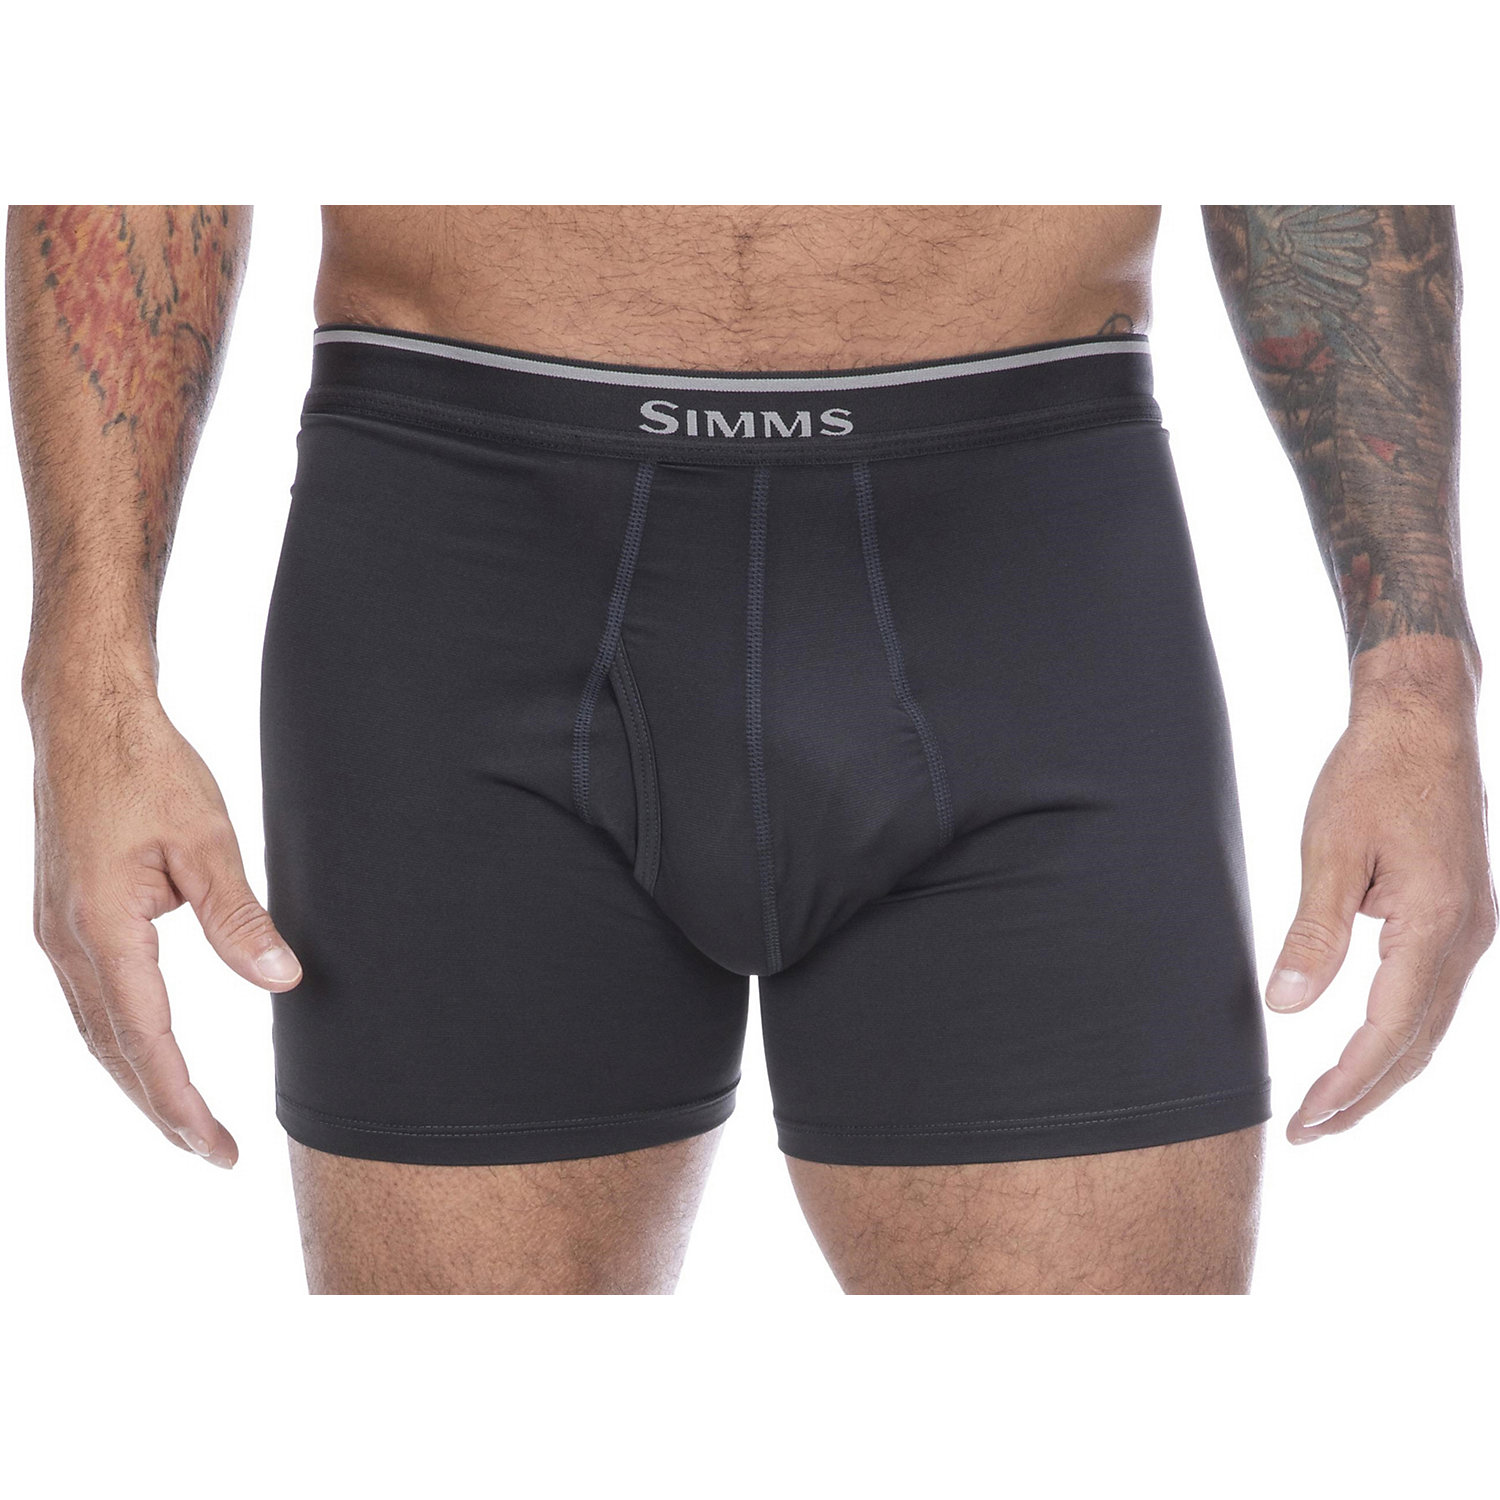 Simms Mens Cooling Boxer Brief